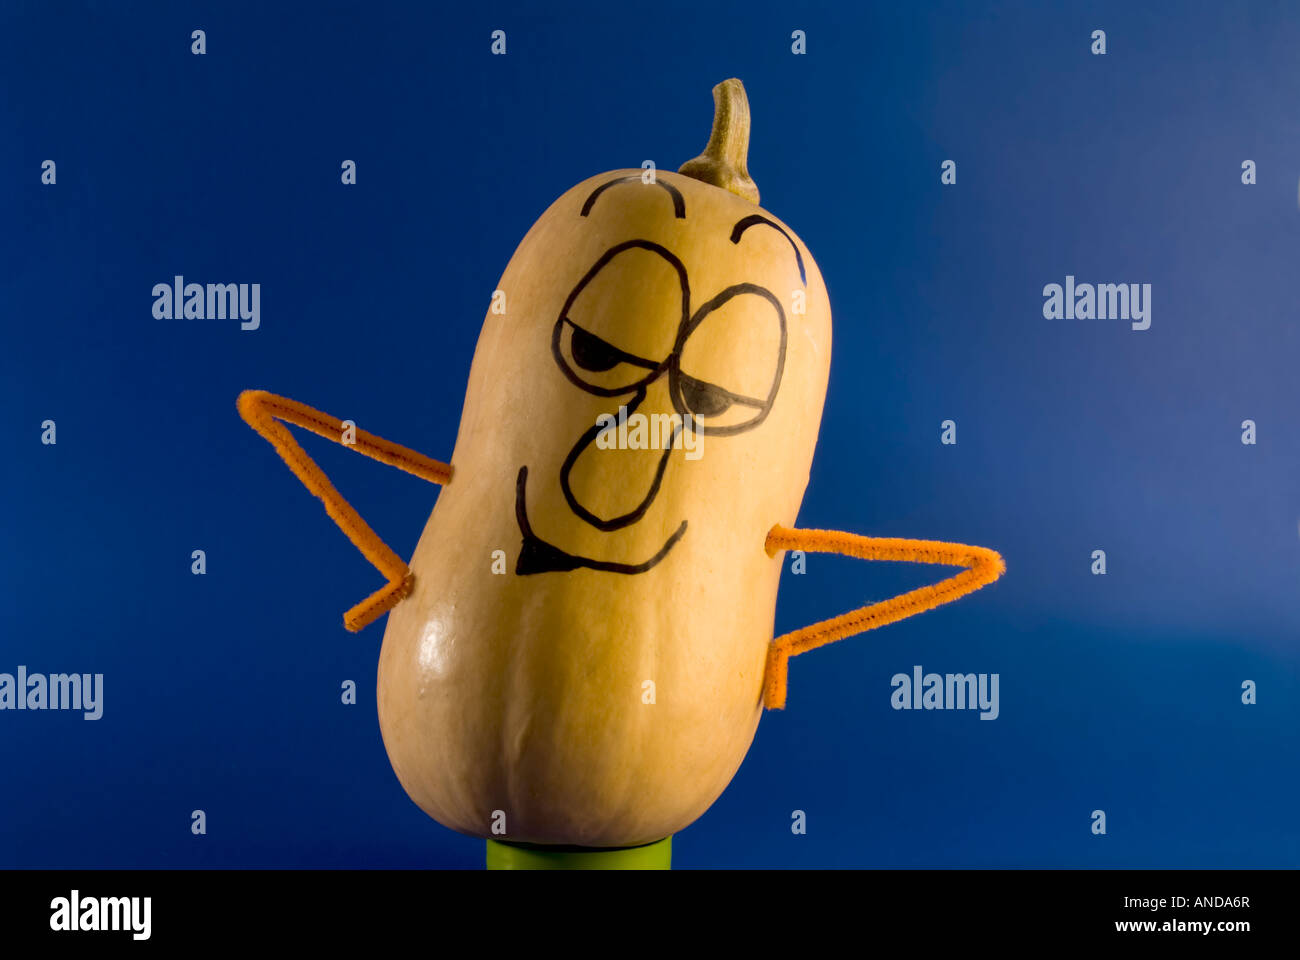 A butternut squash used as a funny character. Stock Photo